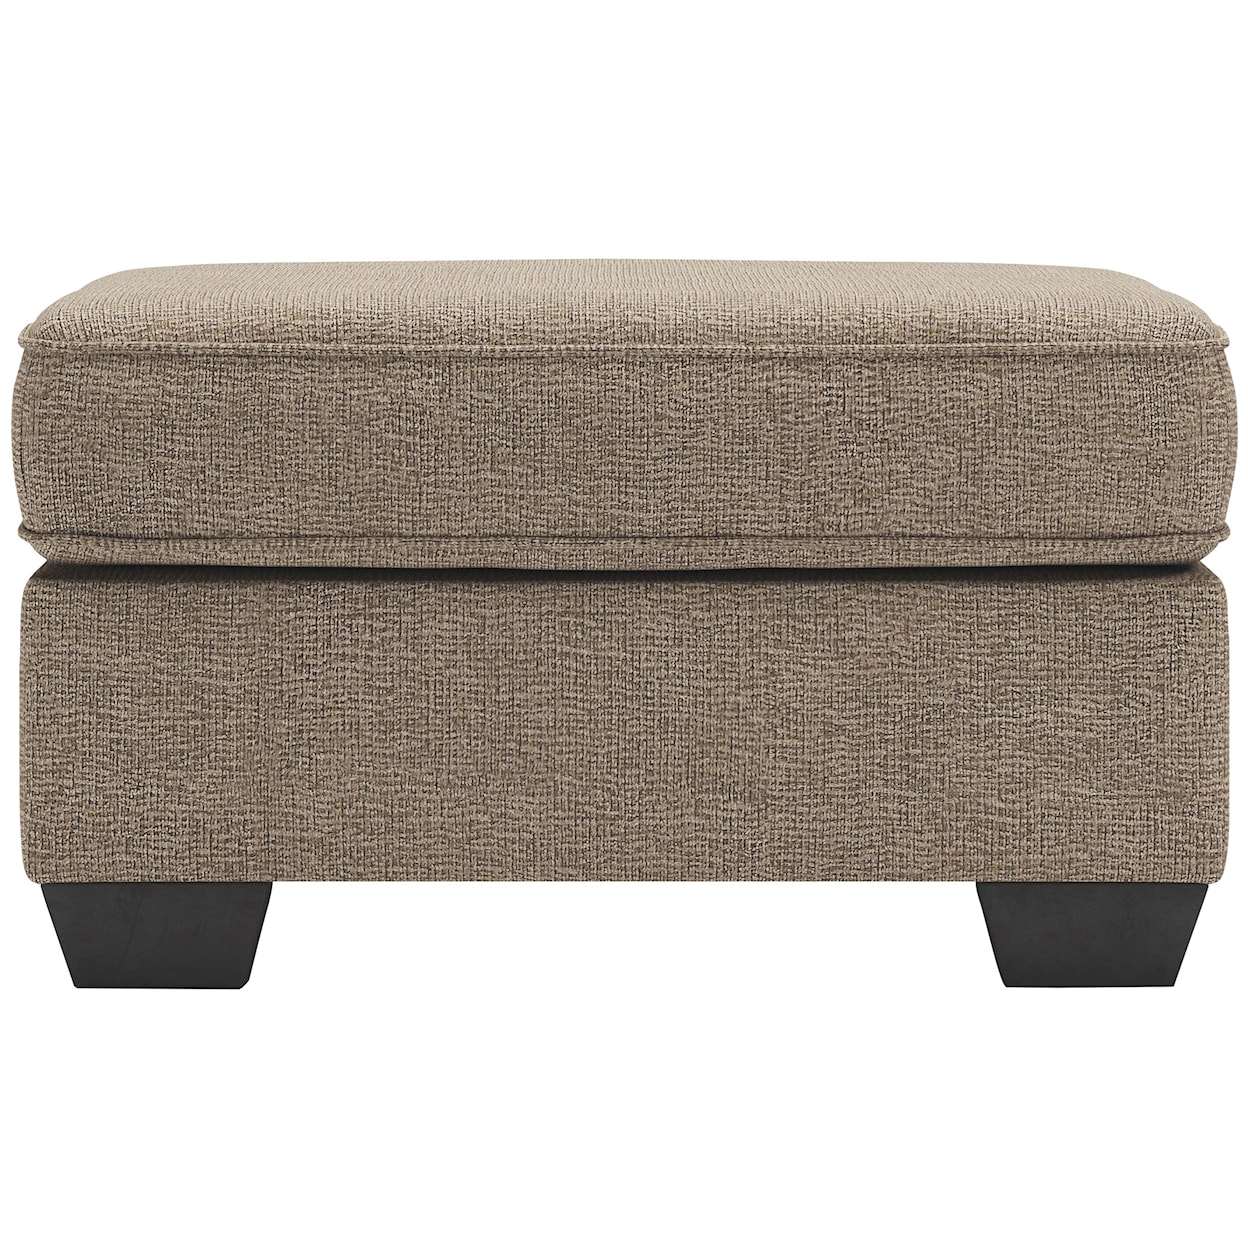 Signature Design by Ashley Furniture Greaves Ottoman